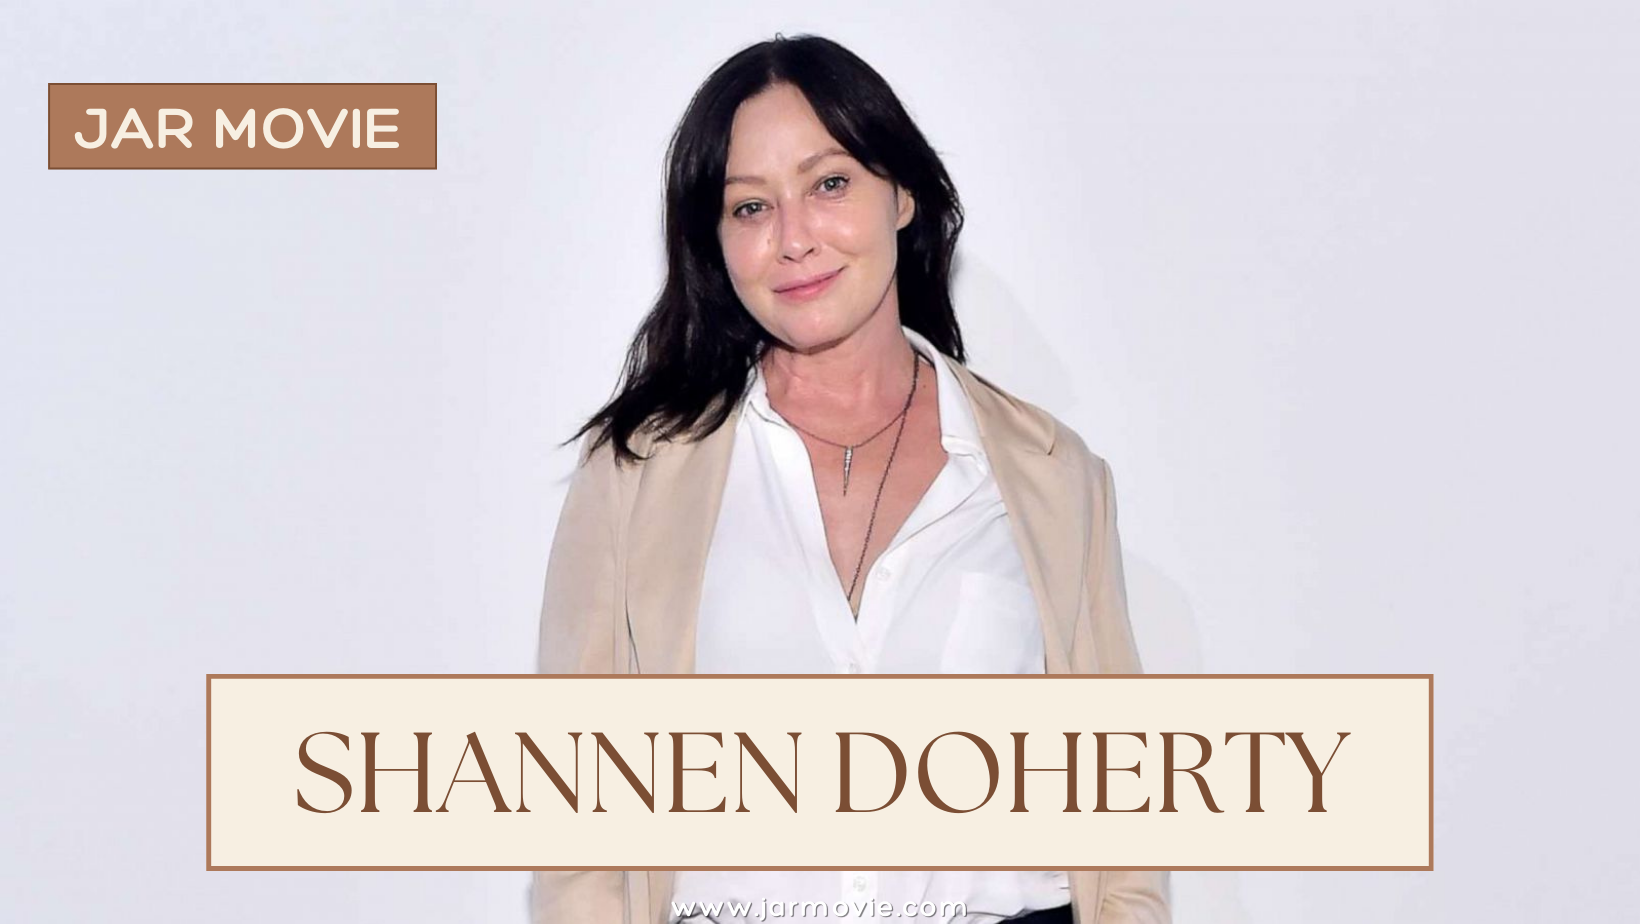 Shannen Doherty says that despite her cancer spreading to her bones, she wants to "Embrace Life."